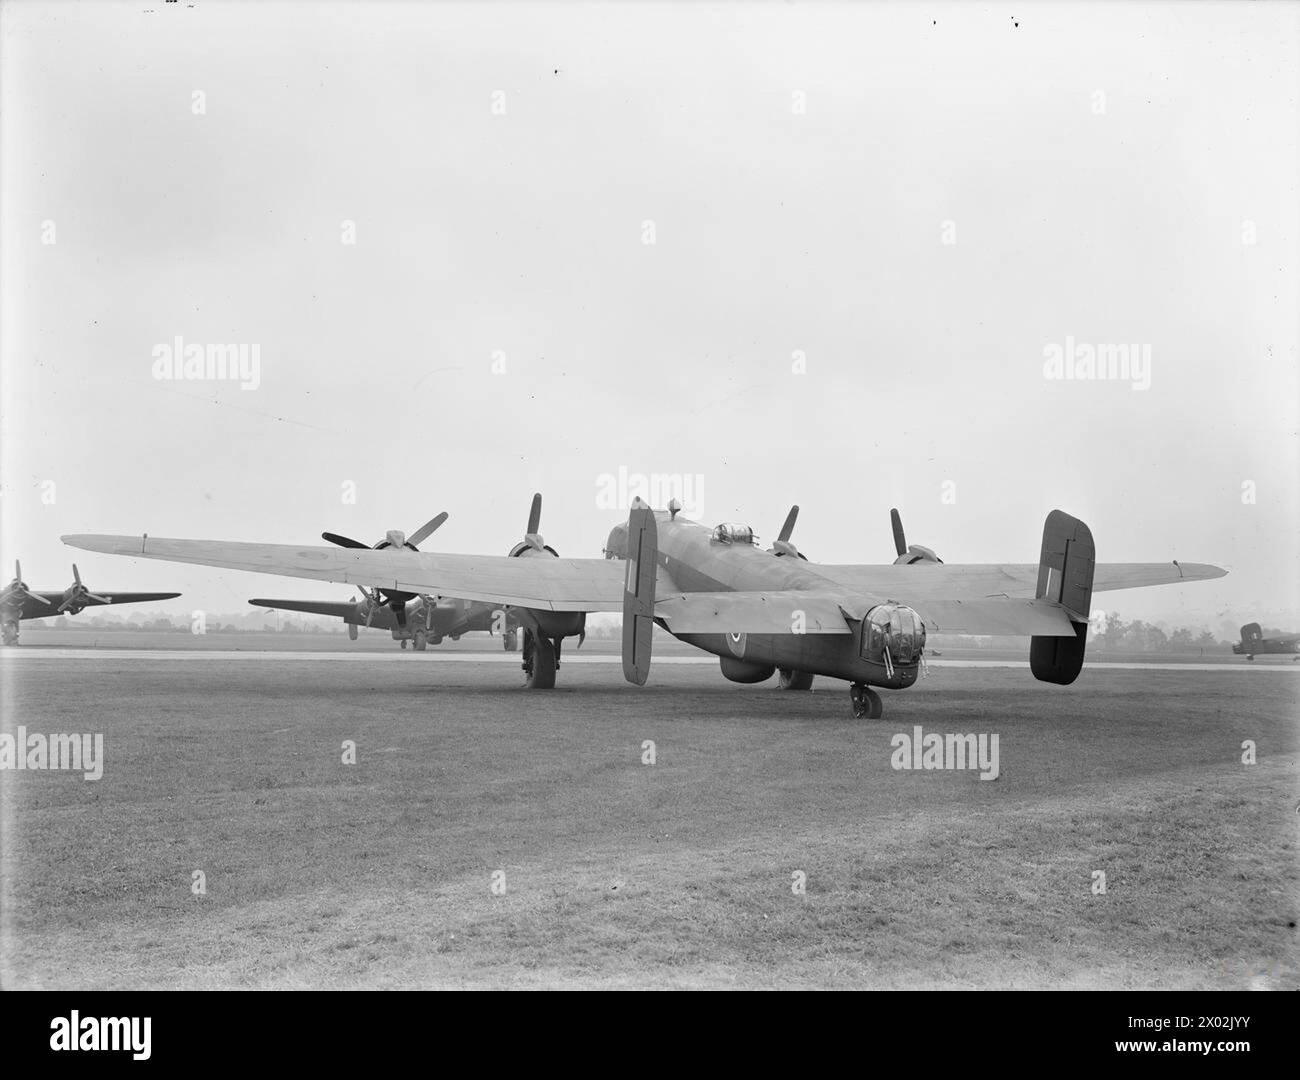 AIRCRAFT OF THE ROYAL AIR FORCE, 1939-1945: HANDLEY PAGE HP.57 HALIFAX. - Halifax B Mark VI, NP831, awaiting delivery at Radlett, Hertfordshire, following completion by Handley Page Ltd Stock Photo